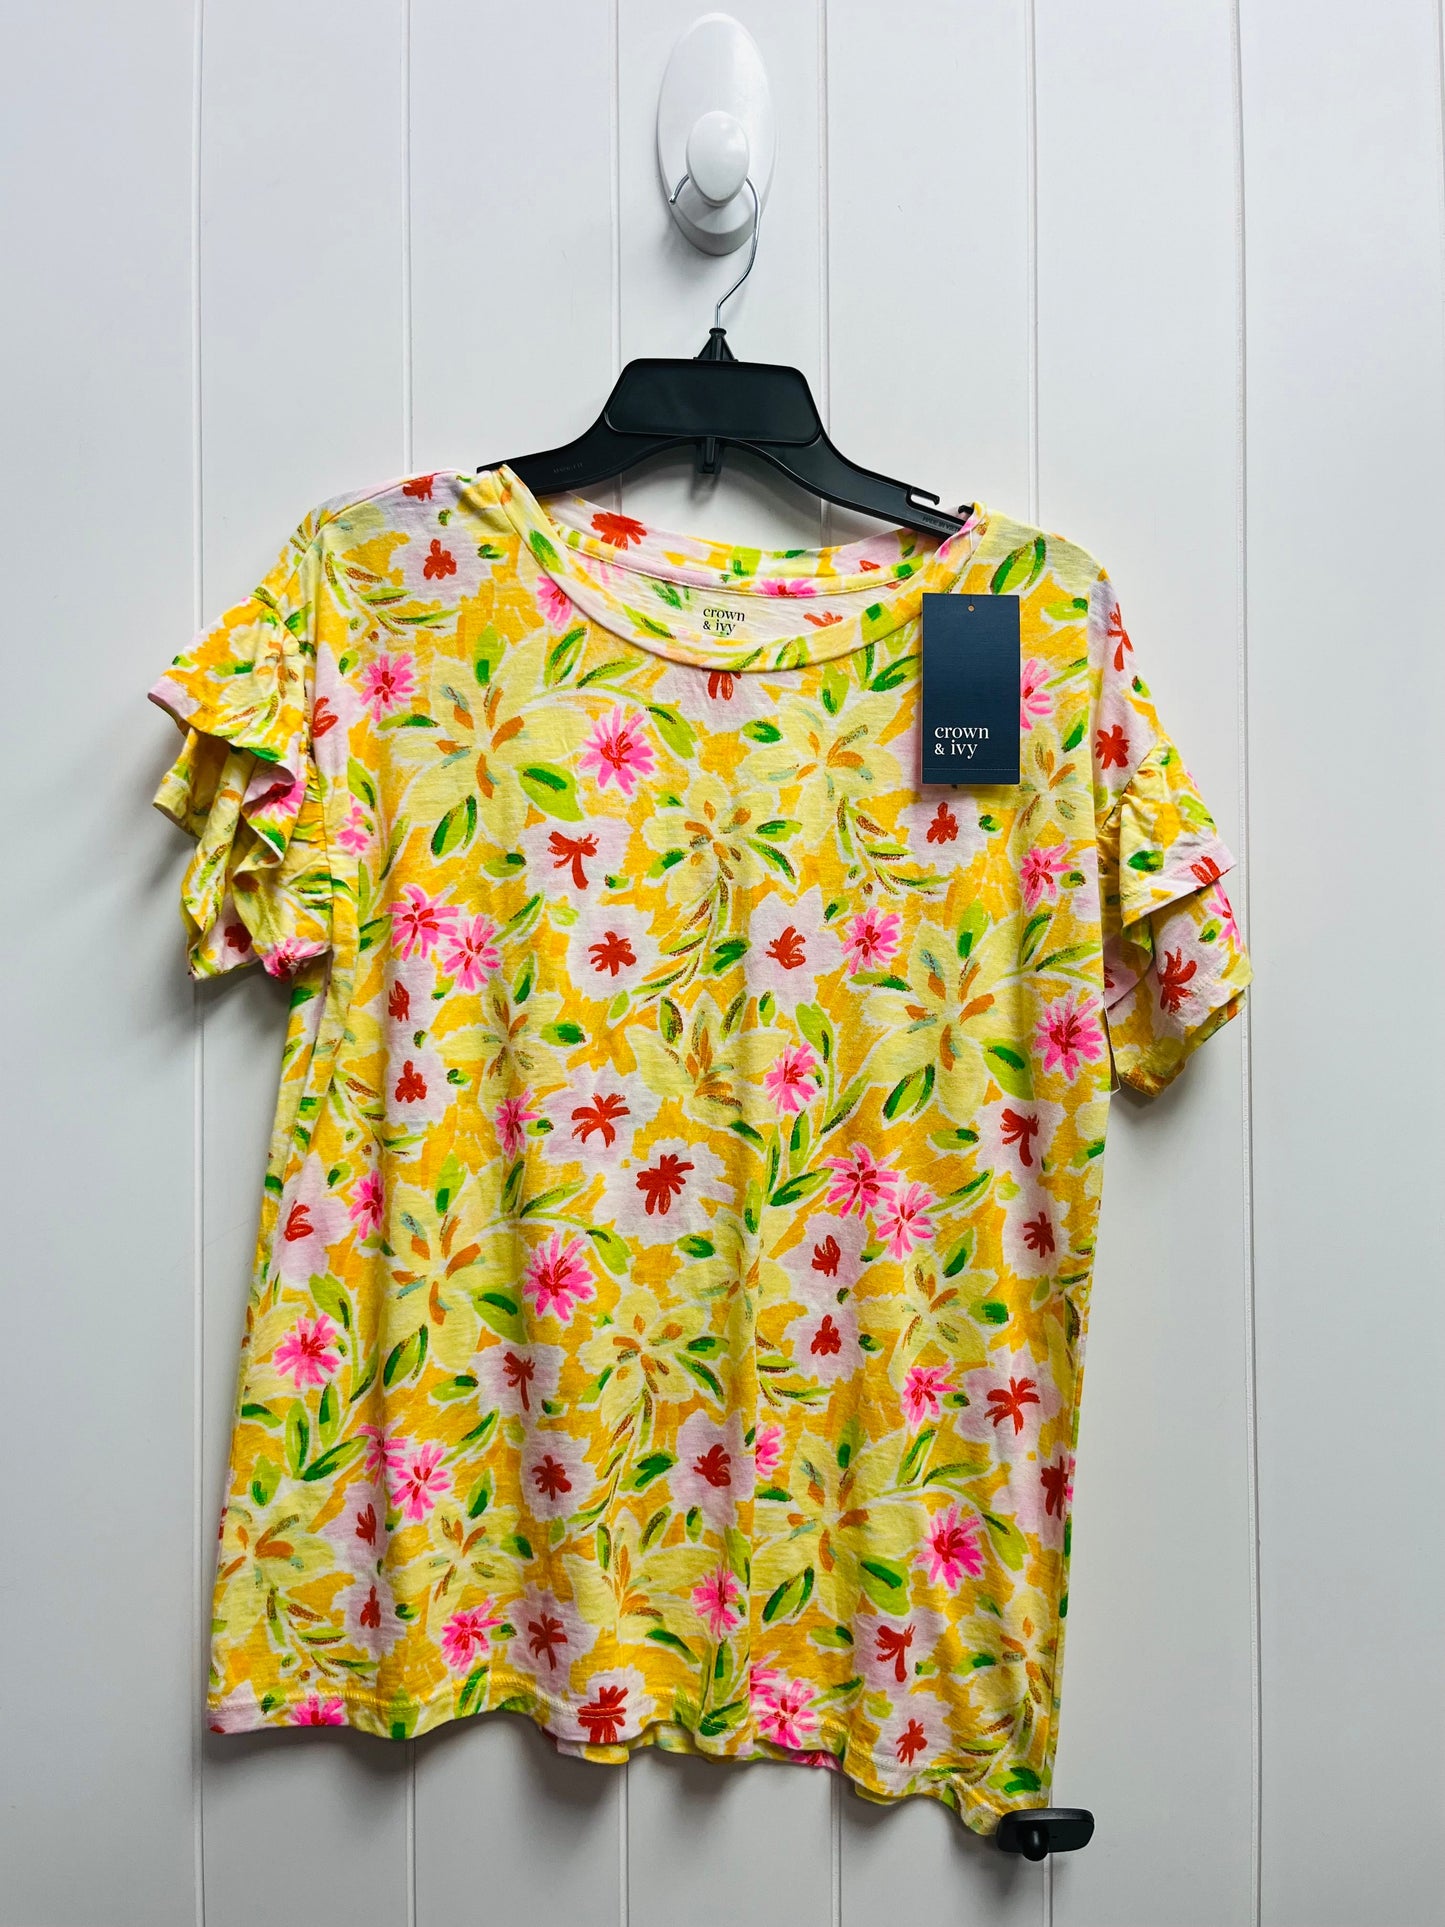 Pink & Yellow Top Short Sleeve Crown And Ivy, Size M